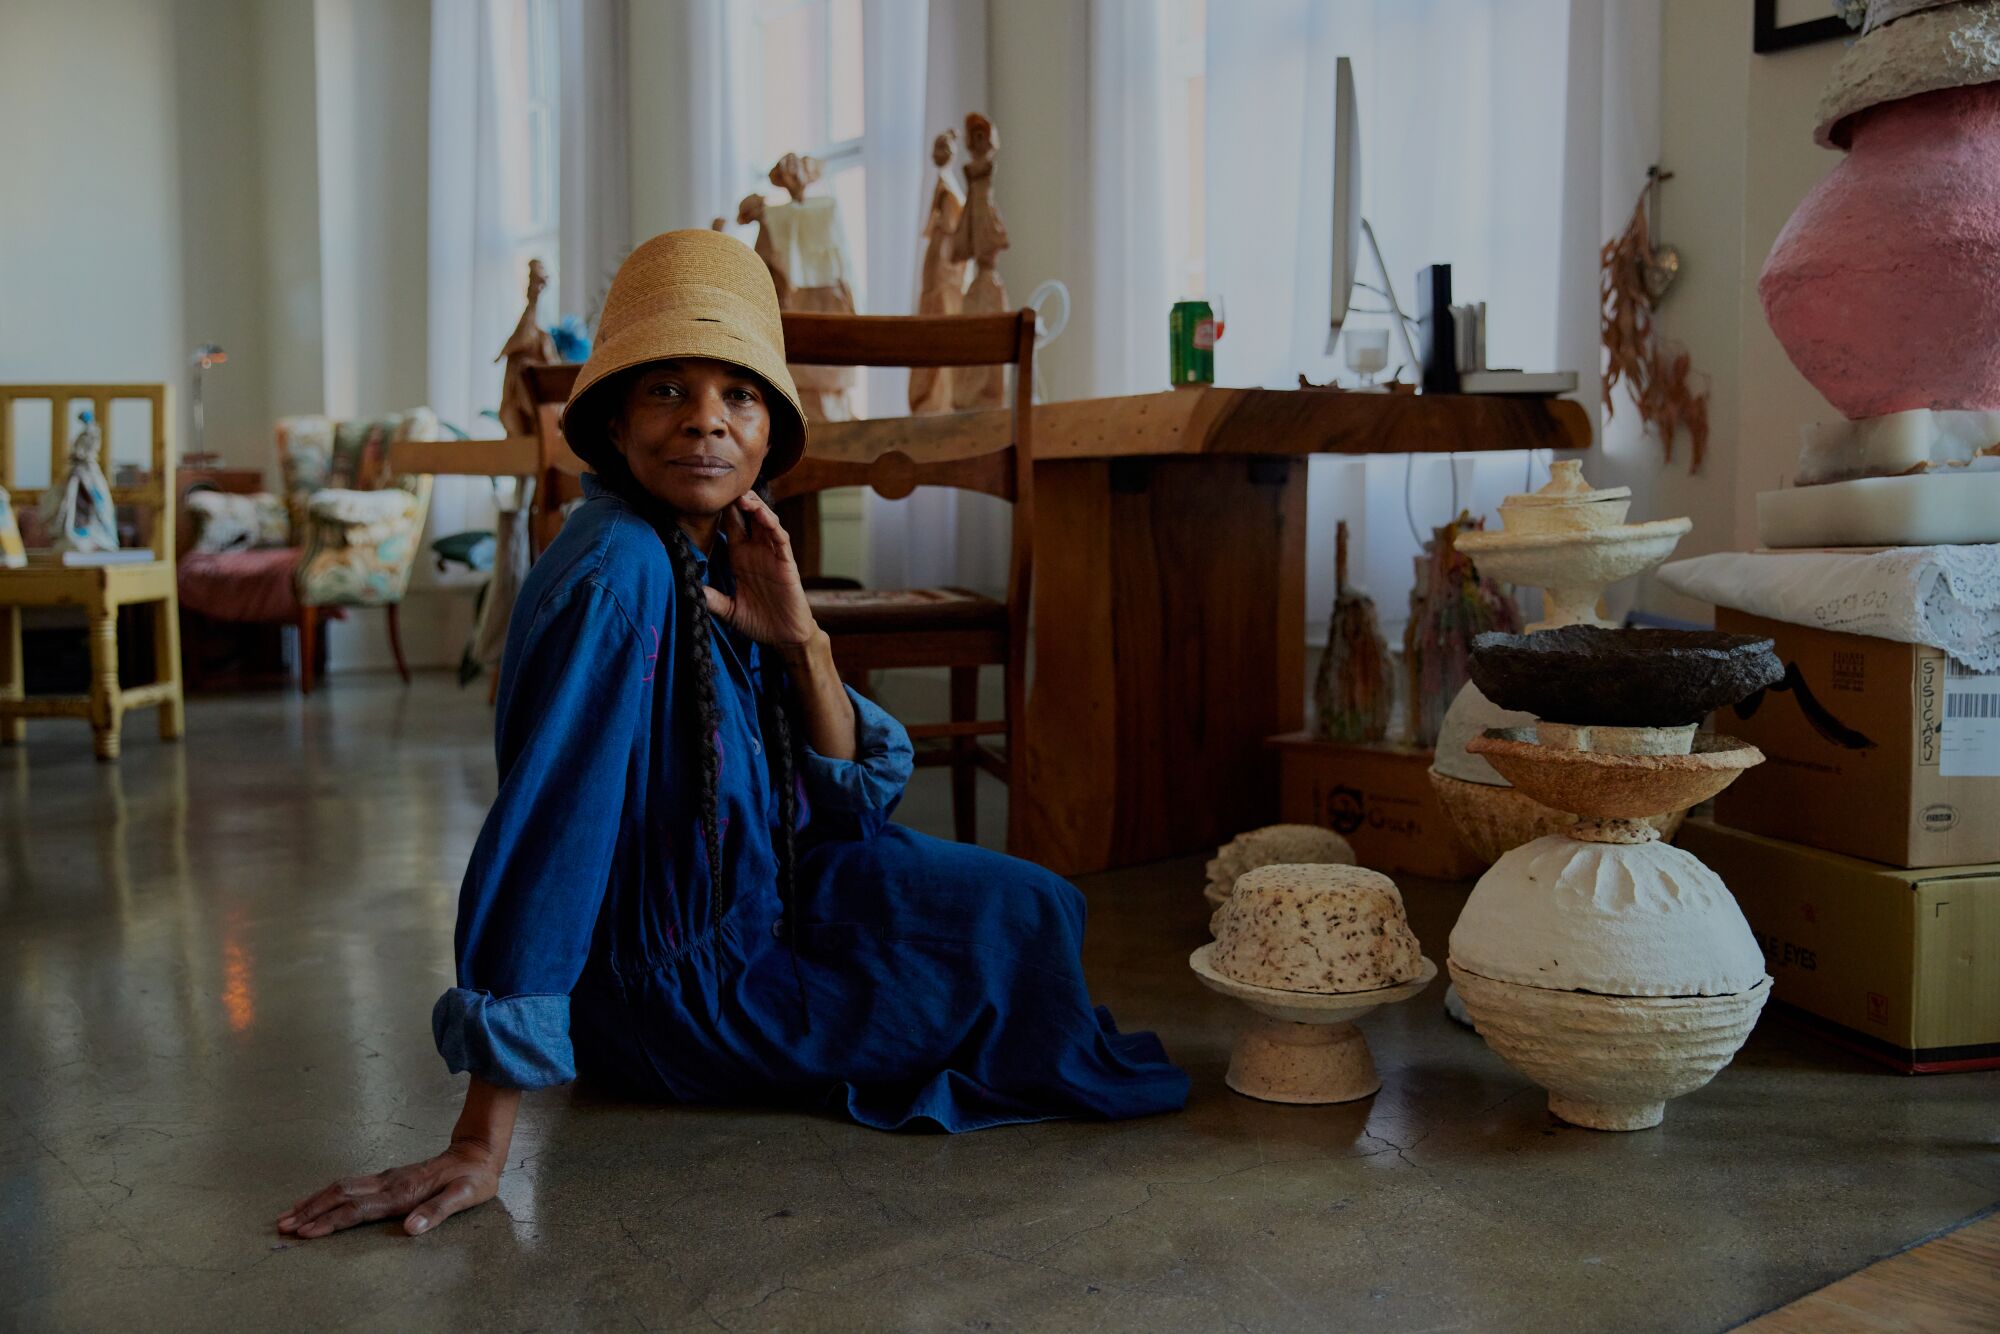 Natalia Pereira at her home and studio, AD105, seated alongside stacks of her paper mache bowls.